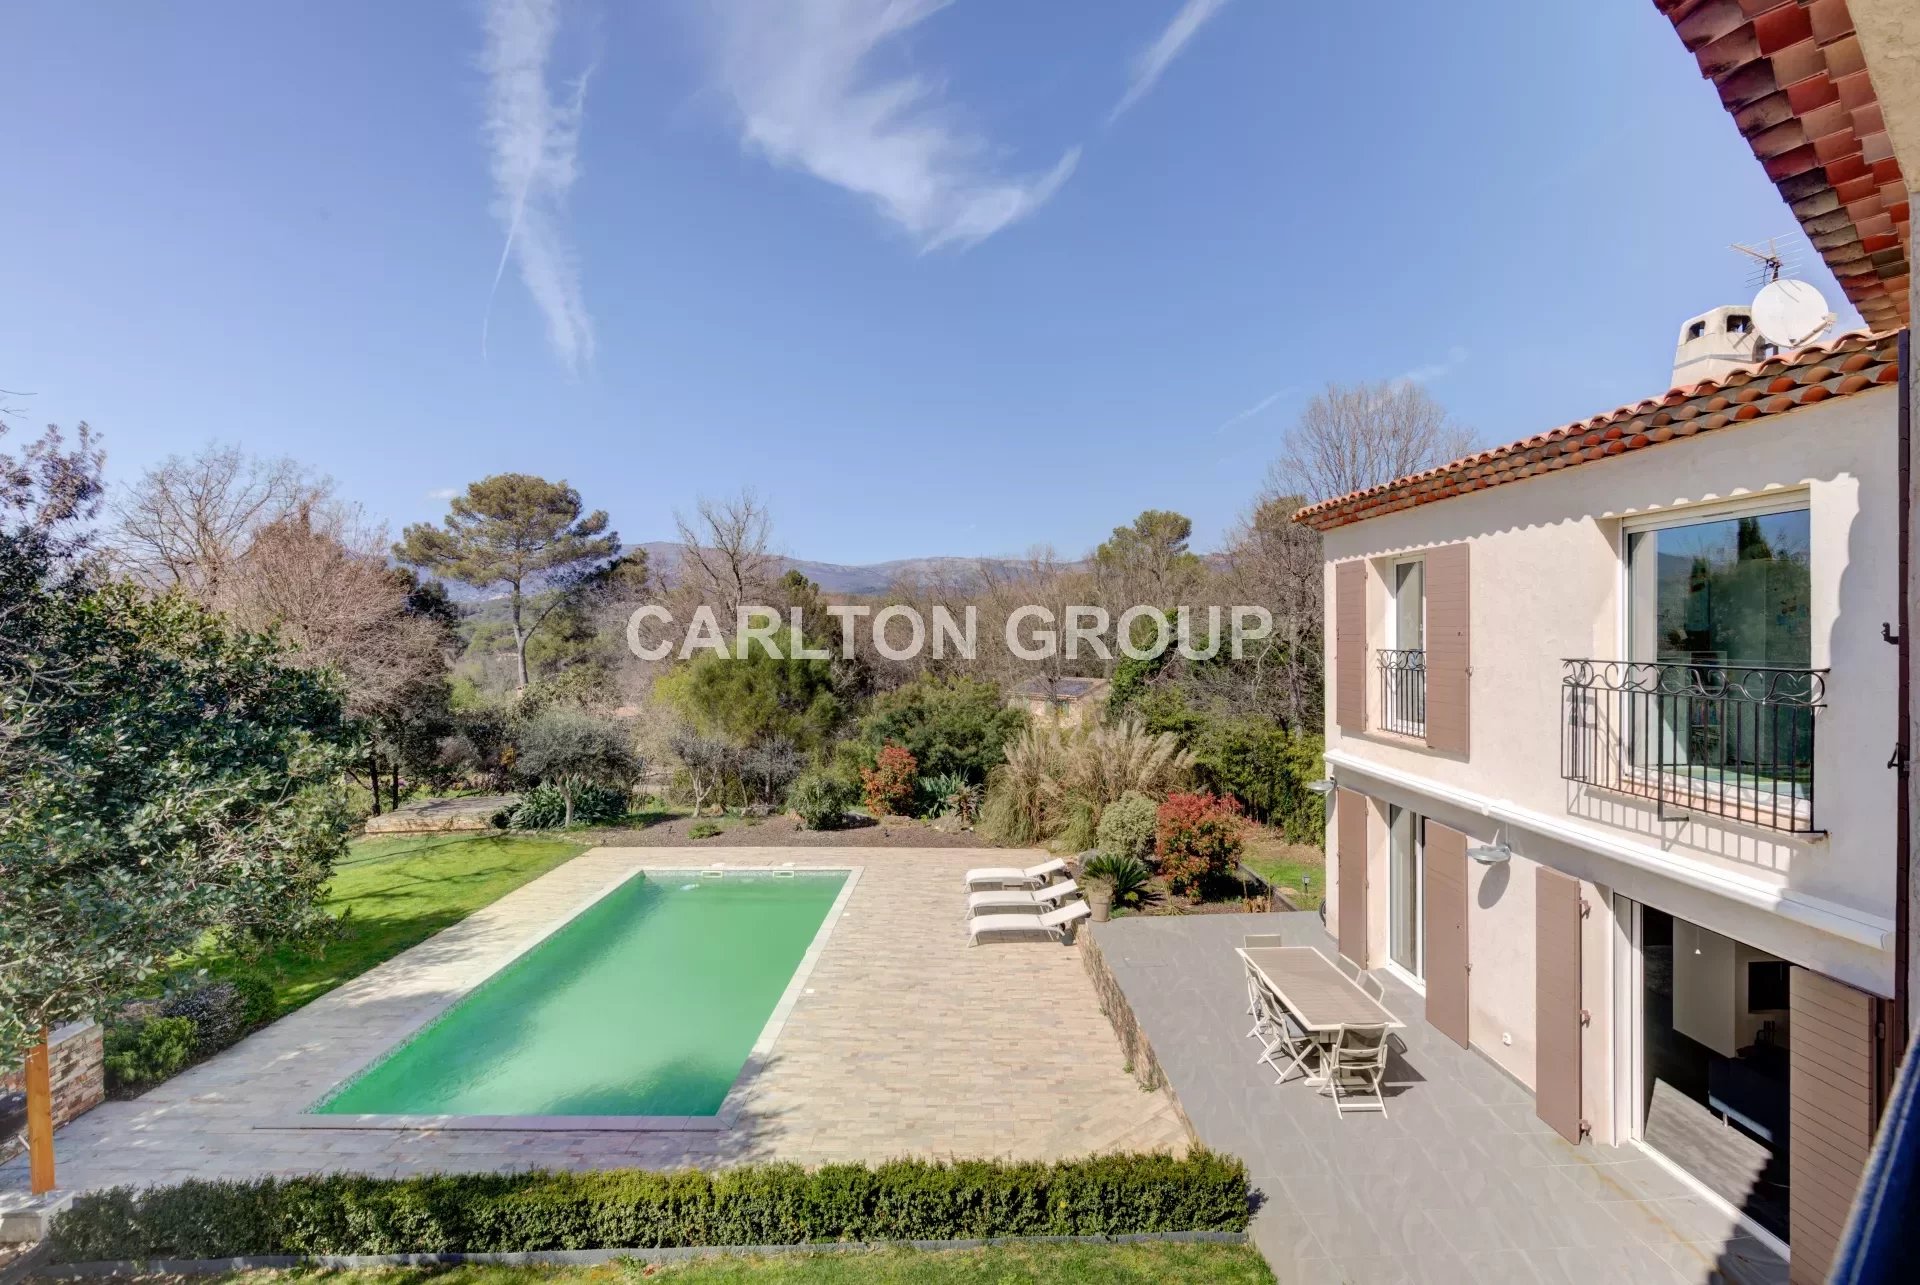 Sole Agent - Modern provencal style villa with countryside views